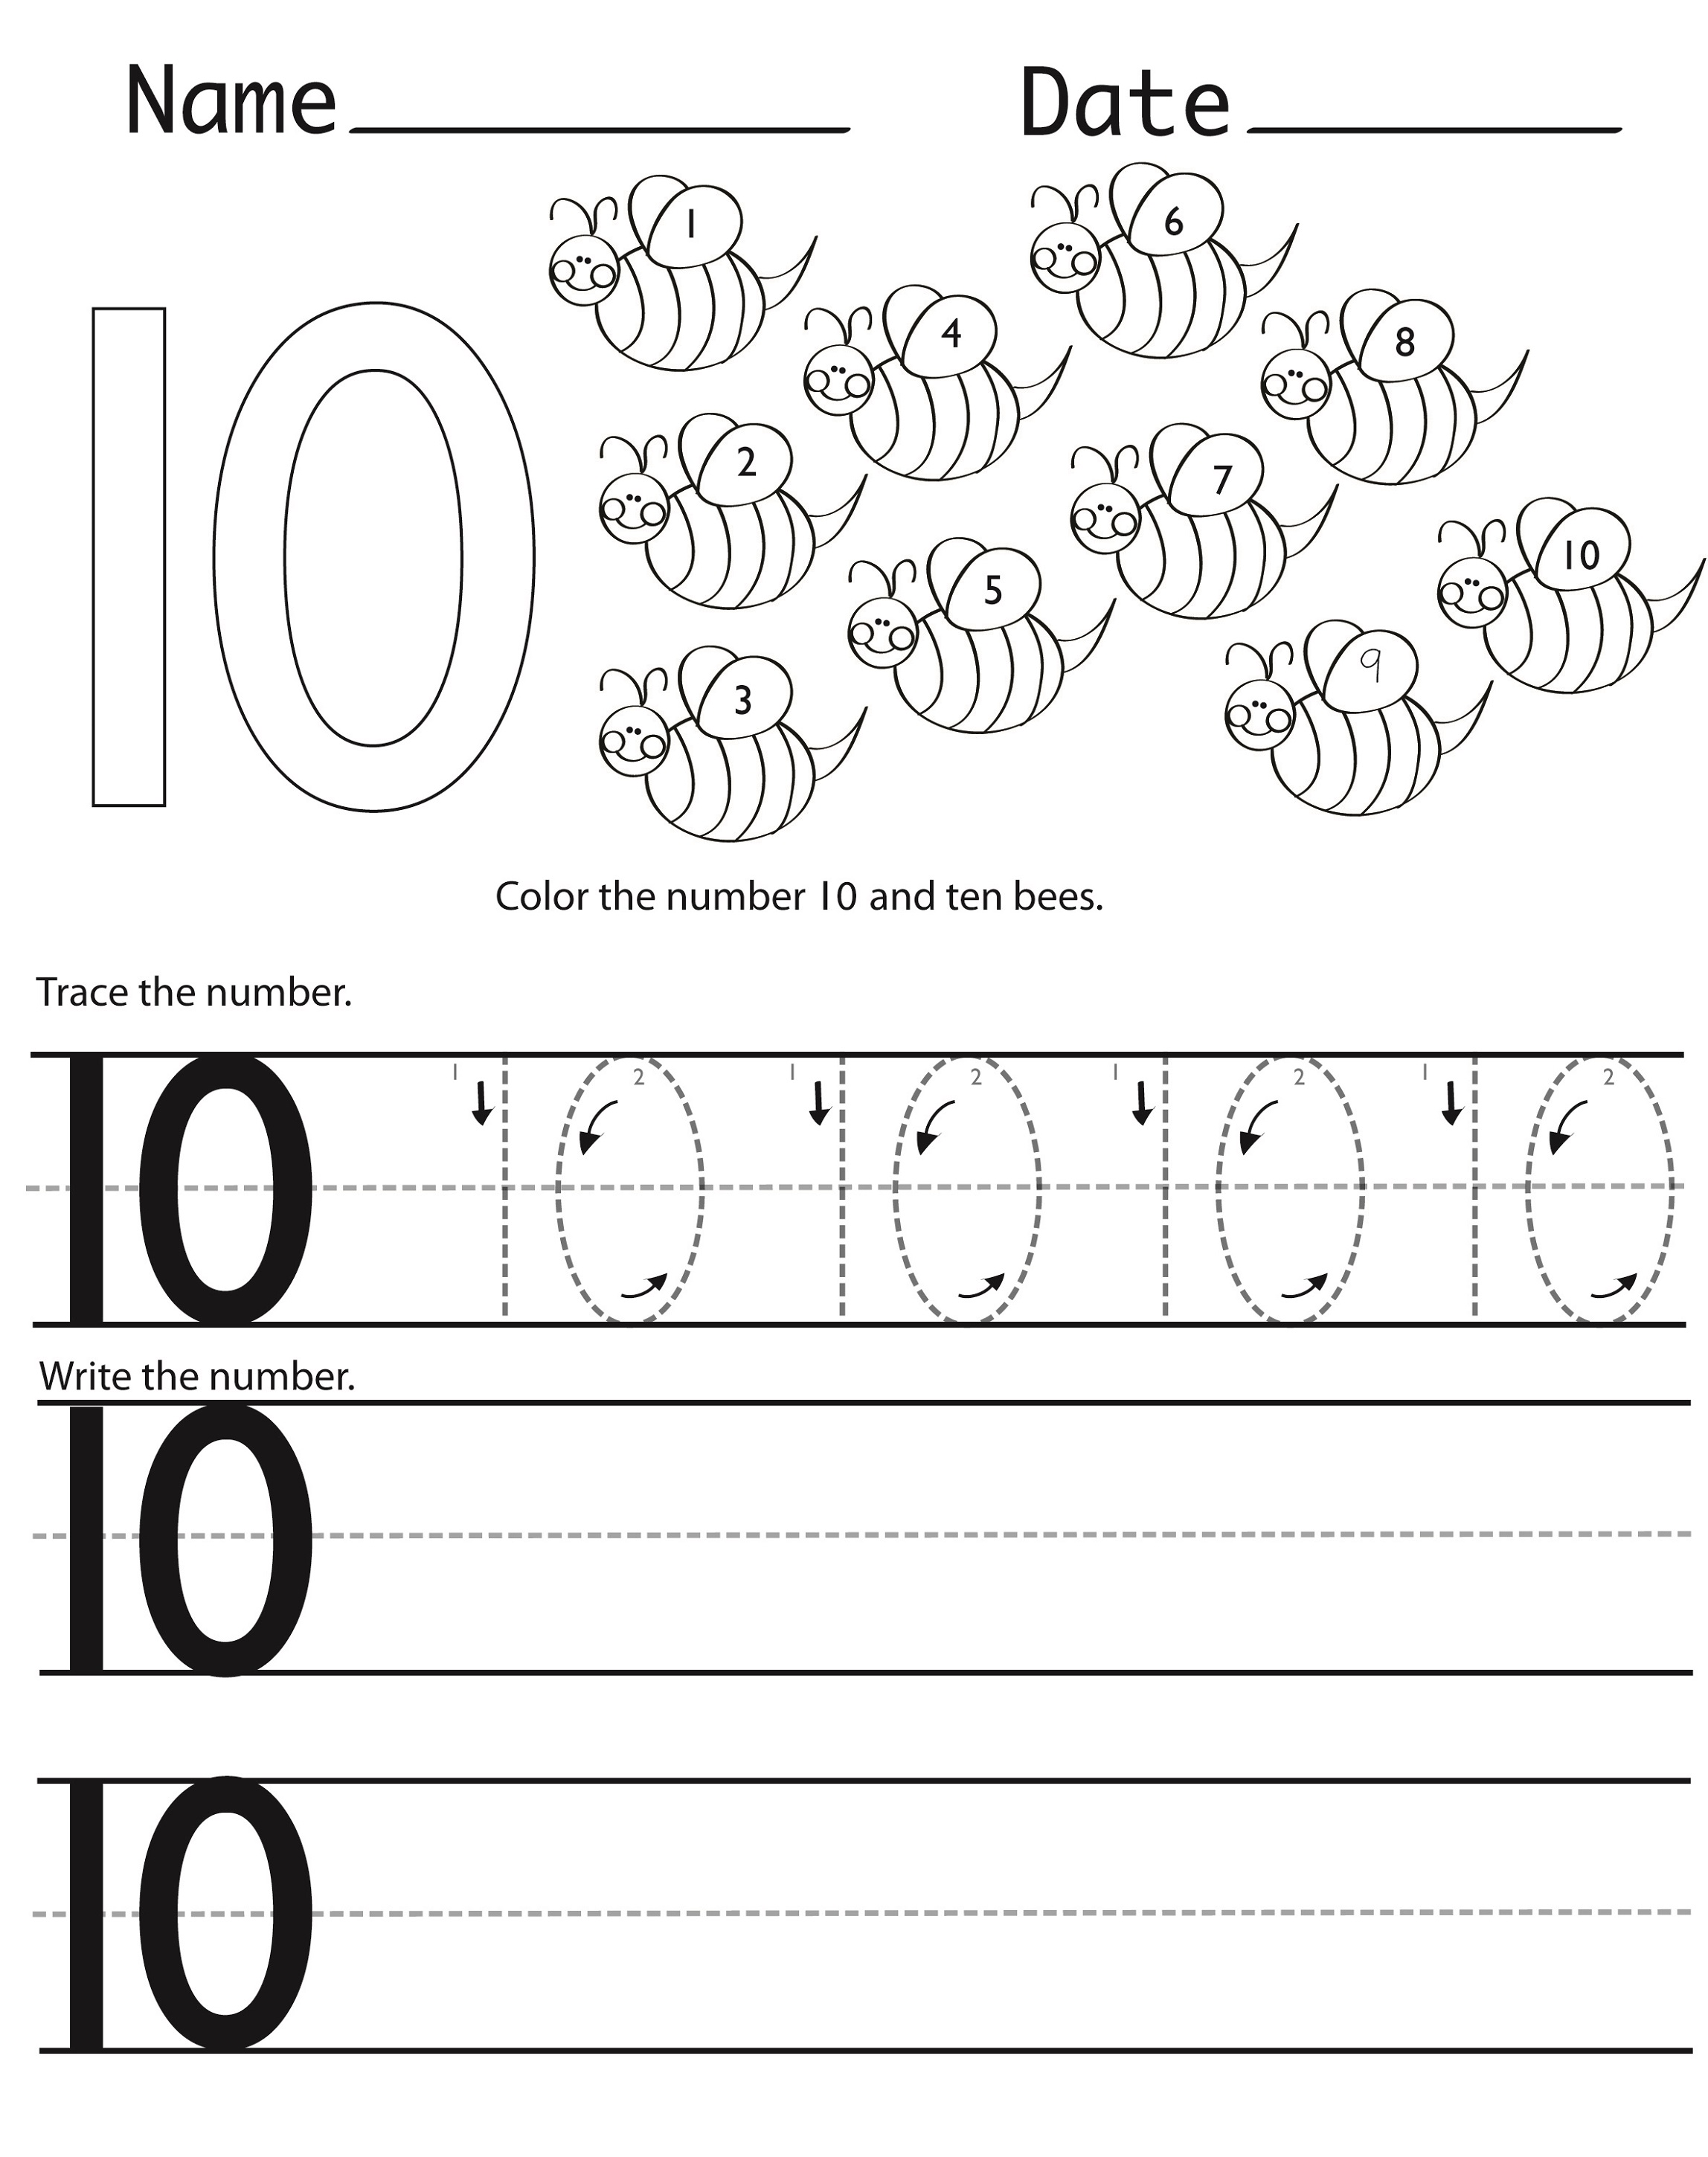 Printable Pictures of Number 10 | Activity Shelter